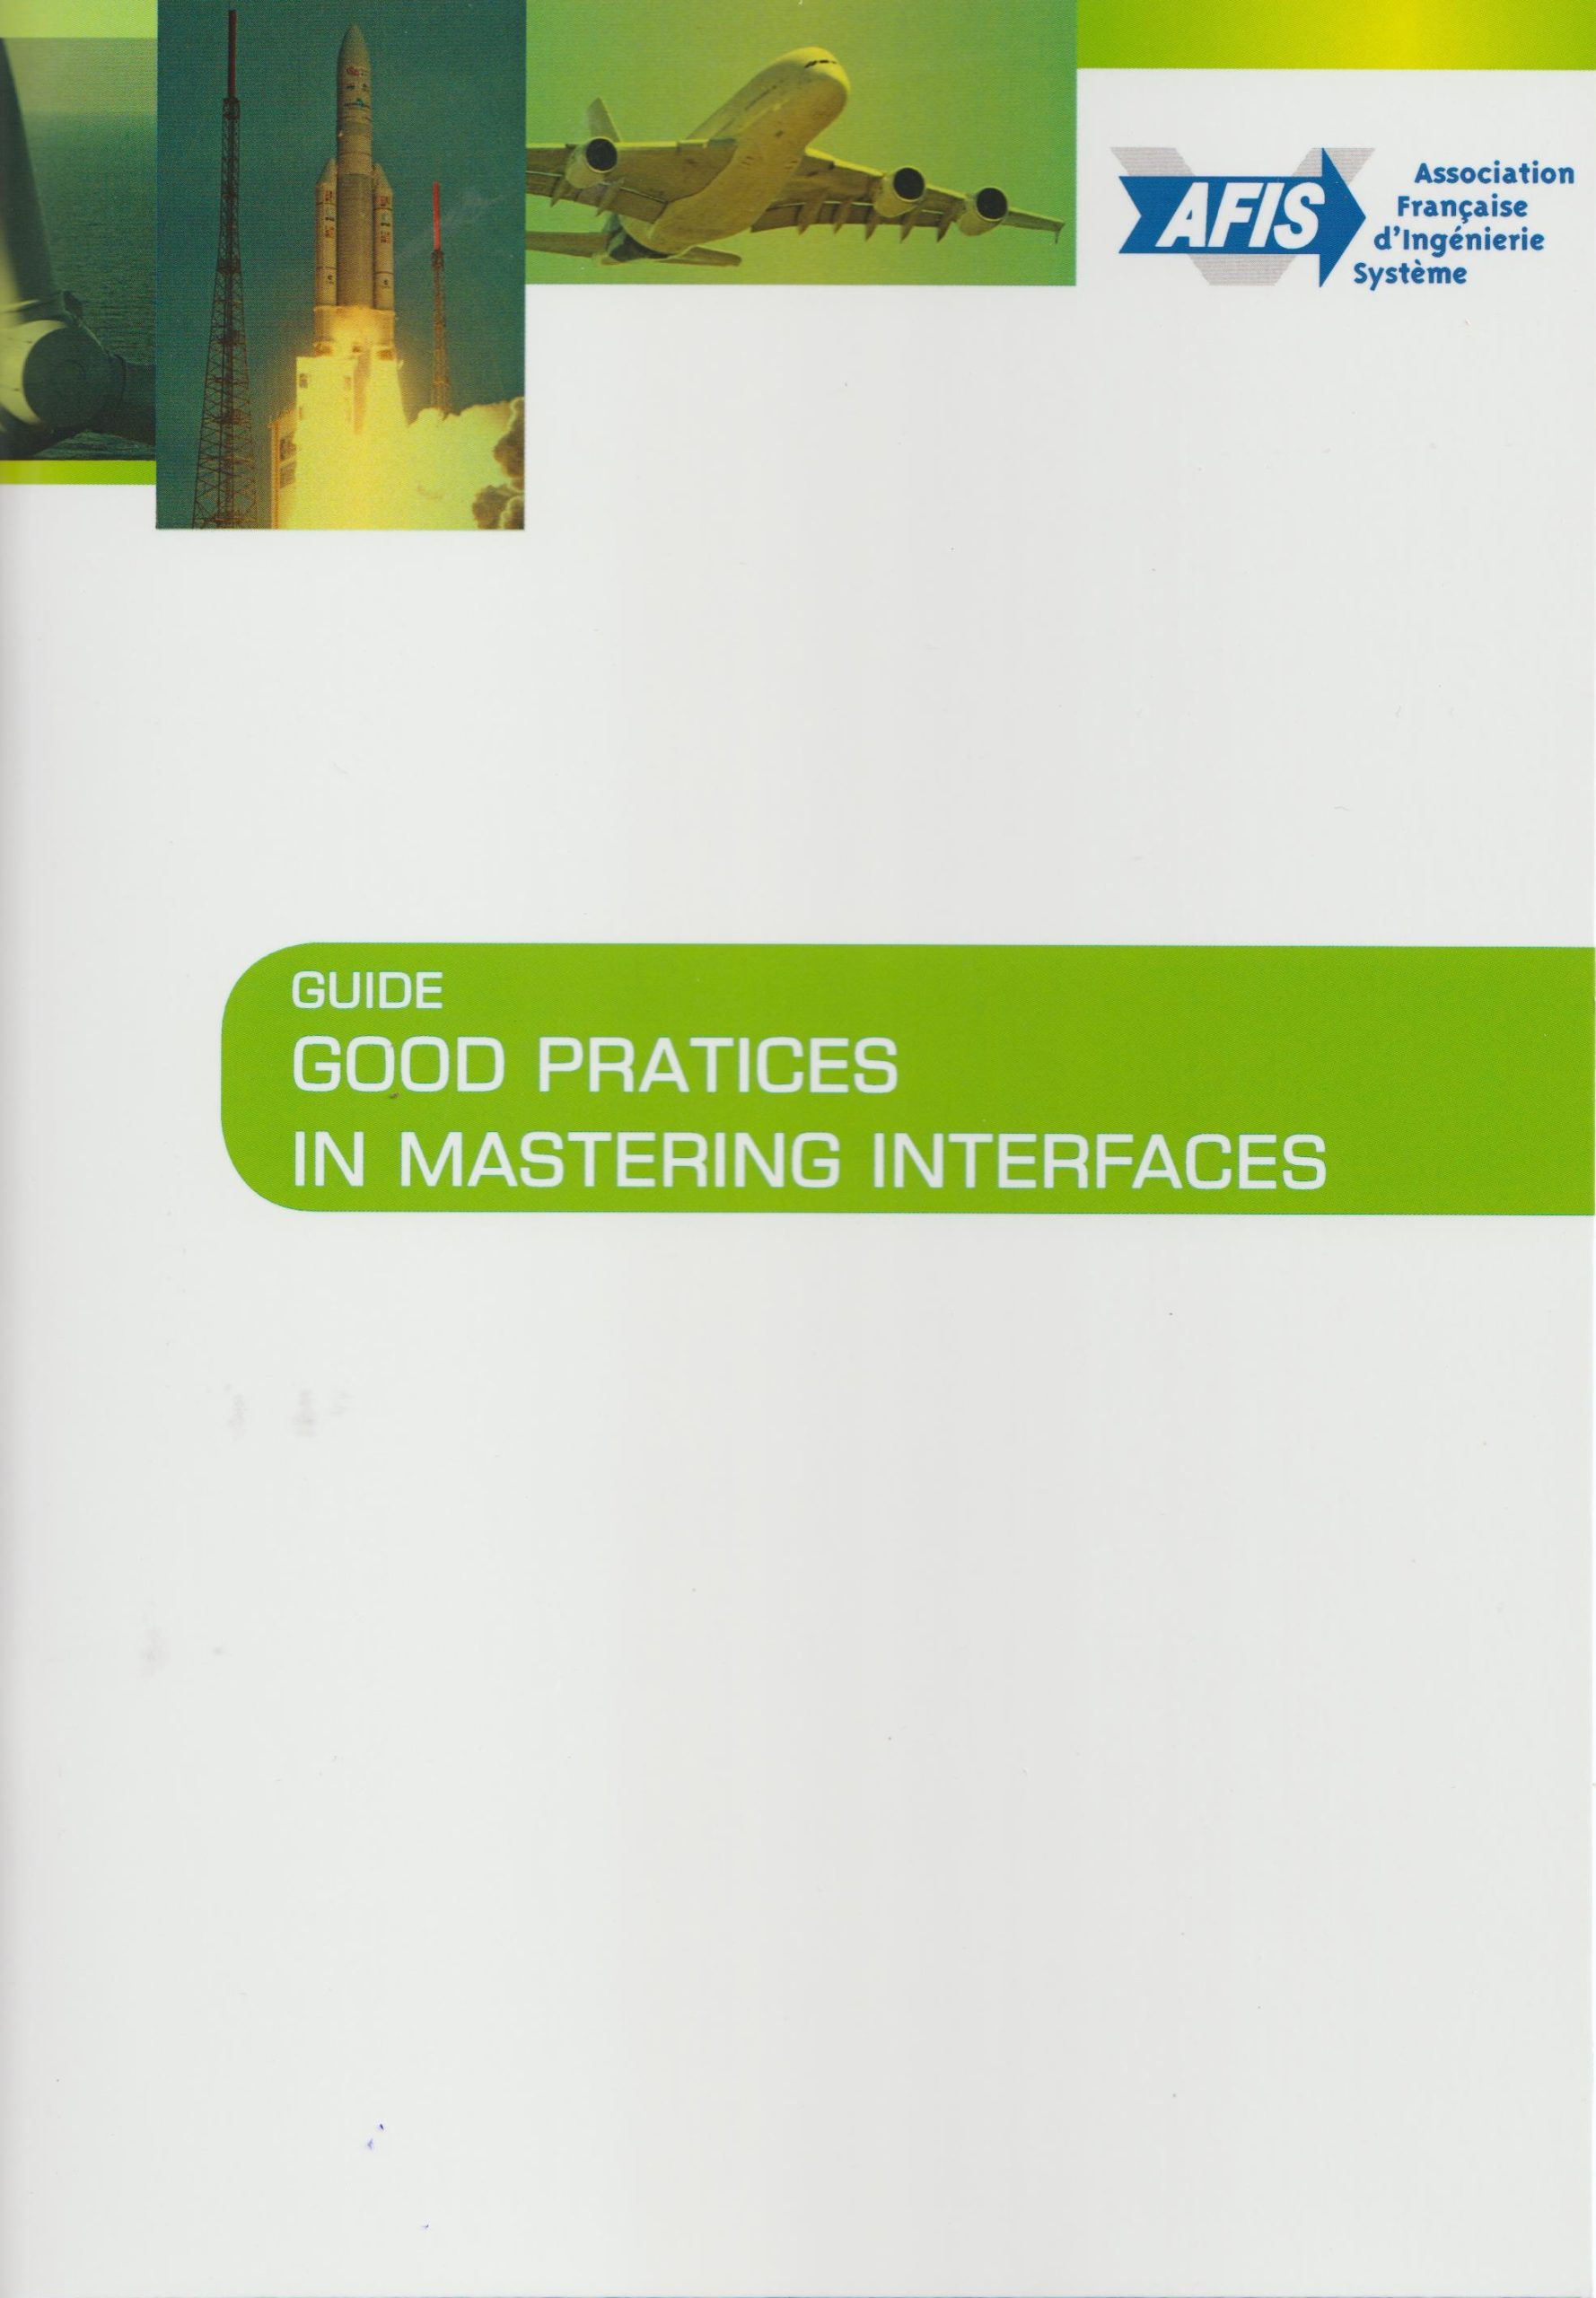 Good practices in Mastering Interfaces